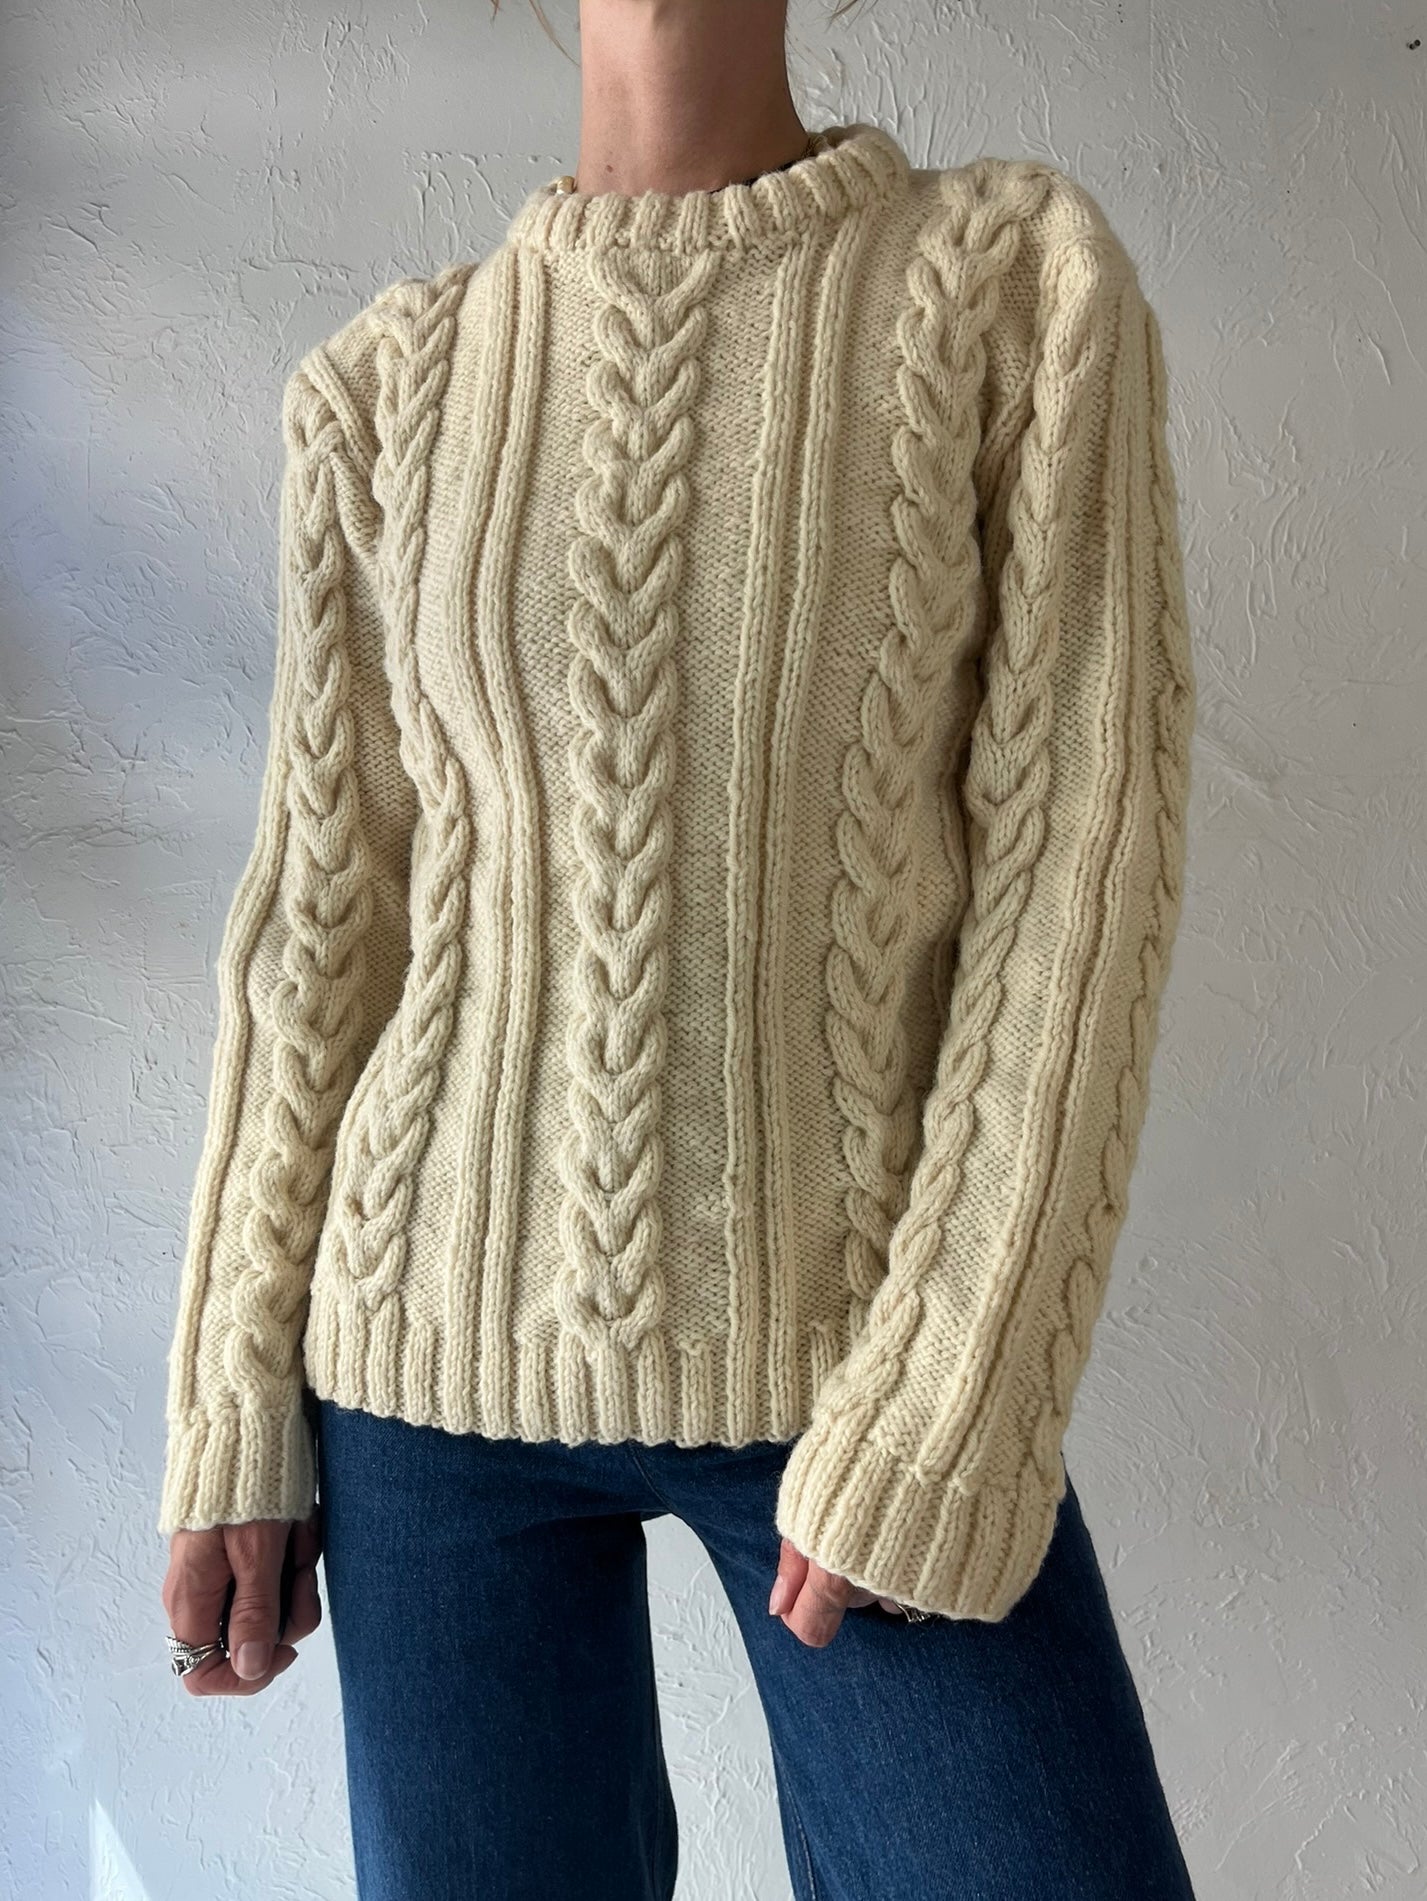 Vintage Mock Neck Cream Cable Knit Acrylic Wool Blend Sweater / Small